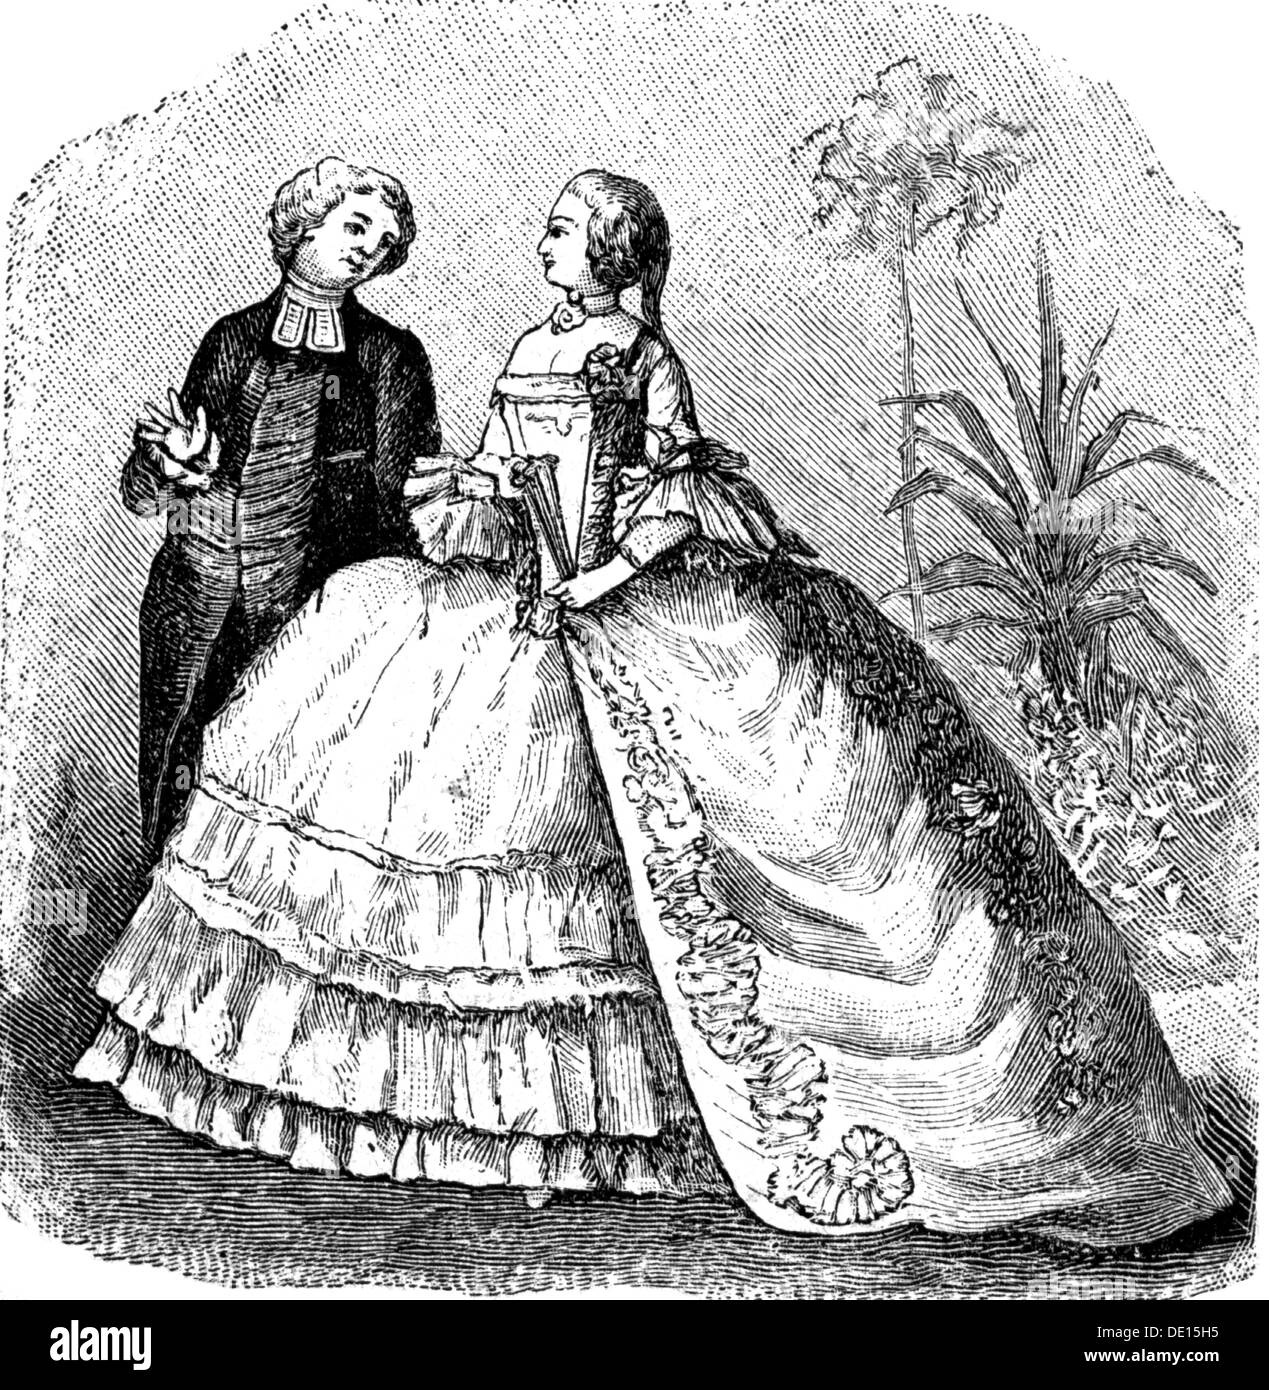 fashion,18th century,woman in ball dress,after painting by Gabriel de Saint-Aubin,18th century,wood engraving,19th century,18th century,19th century,graphic,graphics,clothes,outfit,outfits,ladies' fashion,fashion for women,women's clothing,pannier,panniers,side hoops,hoop skirt,hoopskirt,hooped skirt,hoop skirts,hoopskirts,hooped skirts,full length,standing,parish priest,priest,parish priests,priests,conversation,conversations,talks,talking,talk,Saint - Aubin,ball dress,ball dresses,historic,historical,woman,women,fem,Additional-Rights-Clearences-Not Available Stock Photo